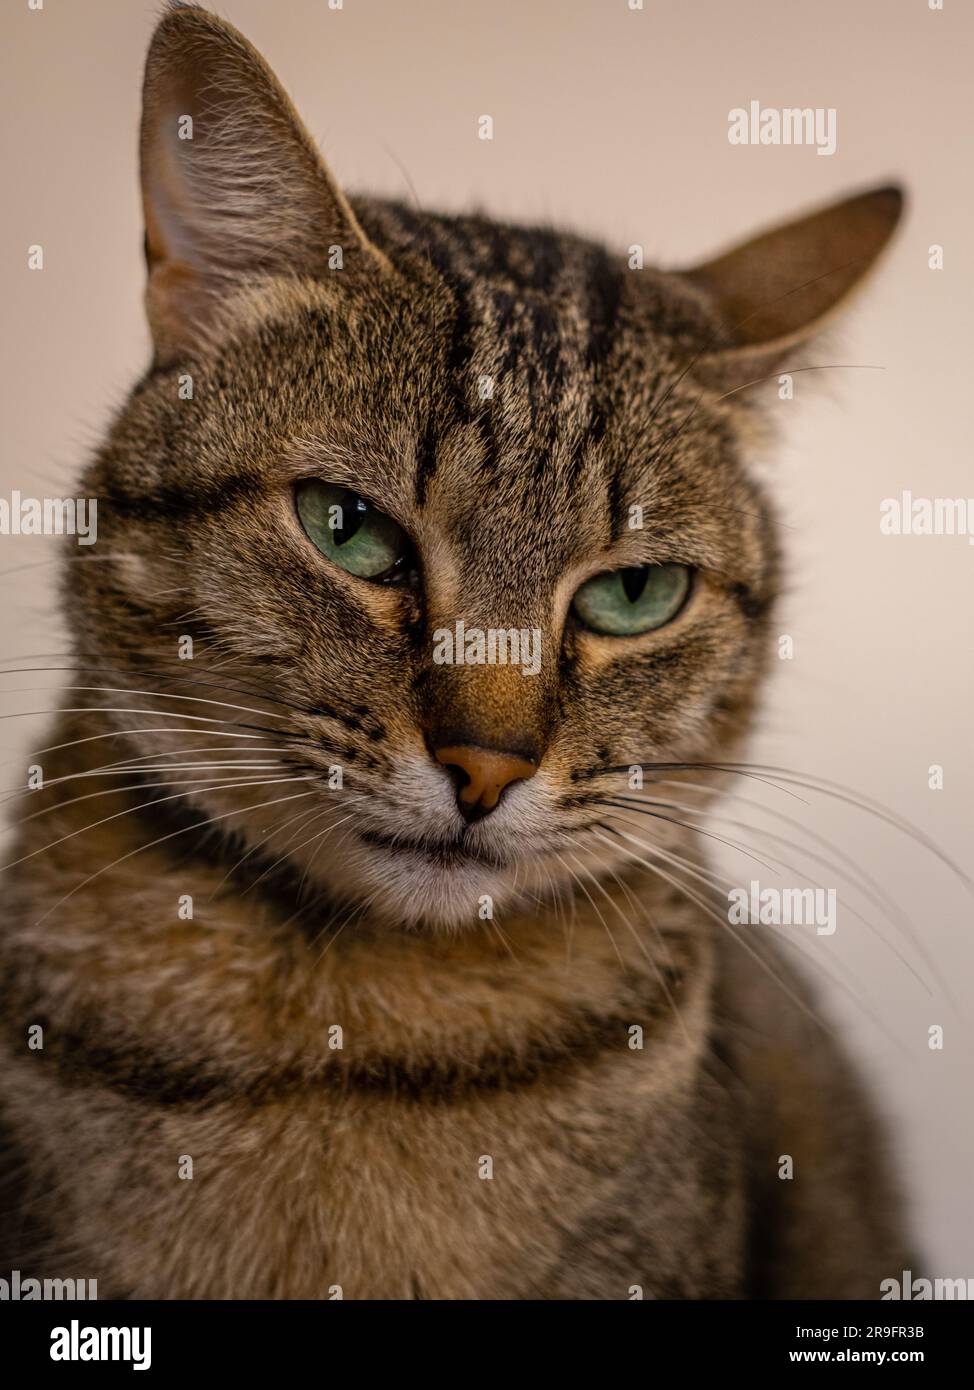 Majestic Stripes: A Serious Gaze of a Green-Eyed Tabby Stock Photo